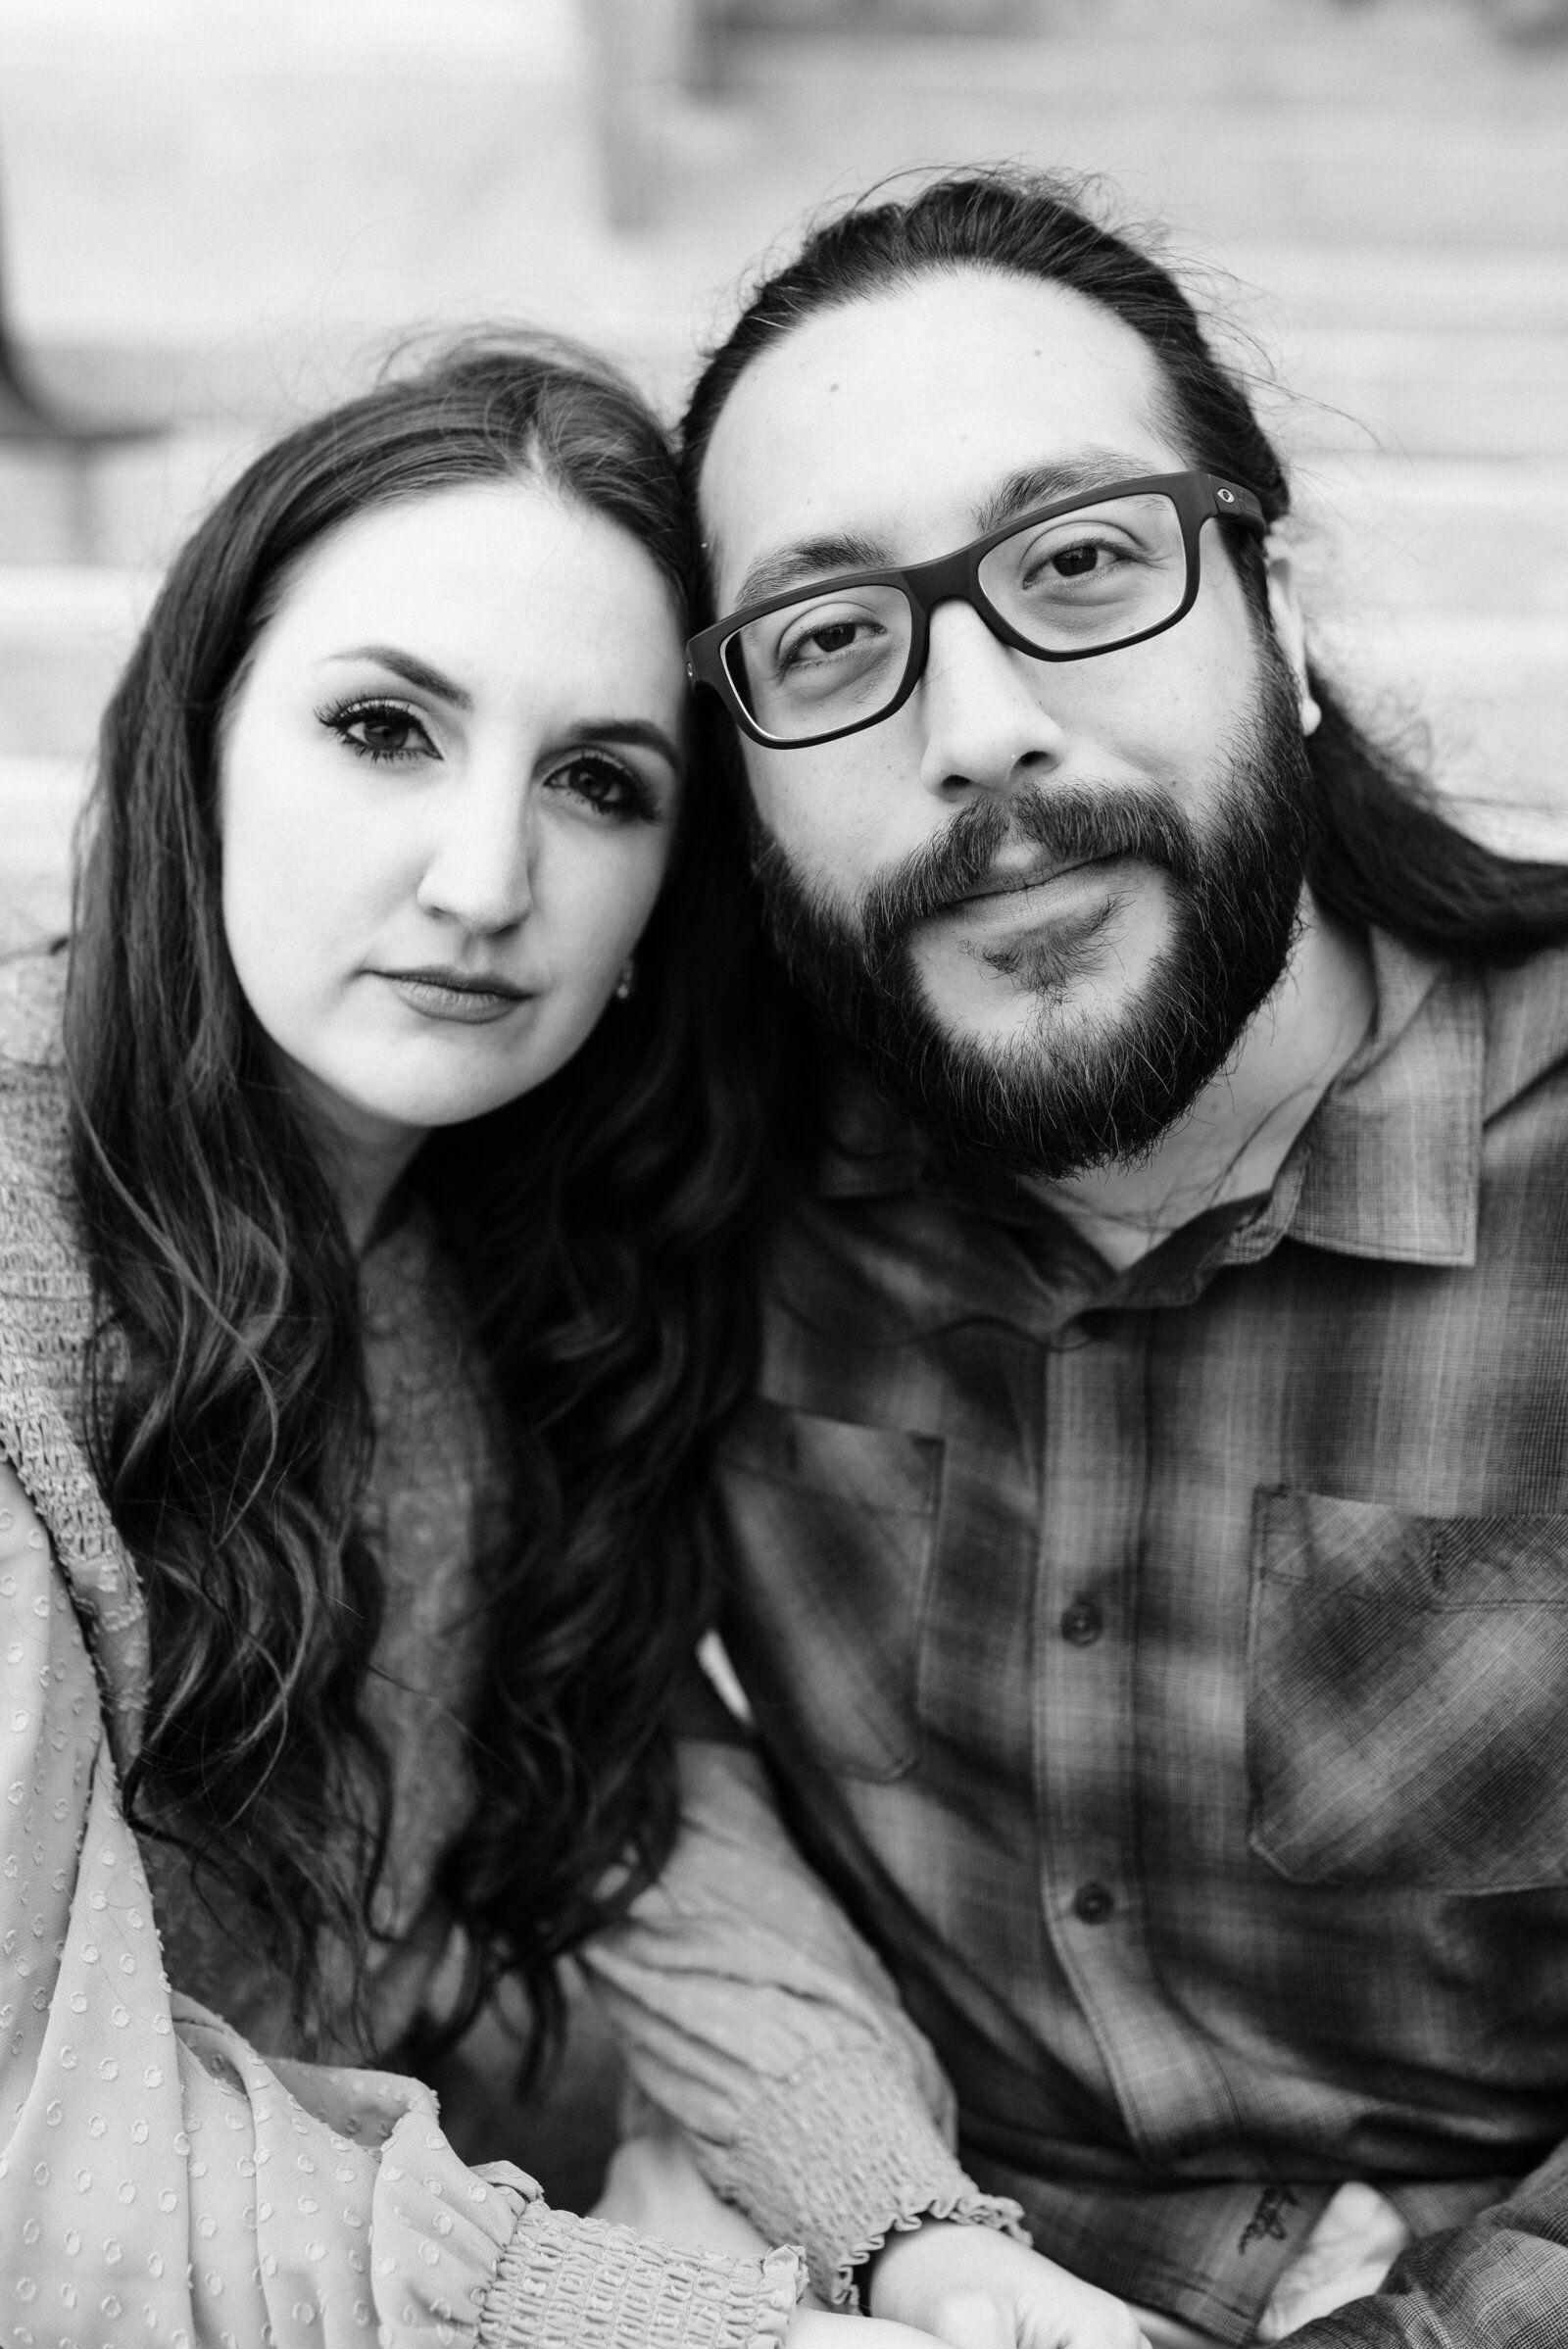 Couple looking at the camera with a serious pose in black and white